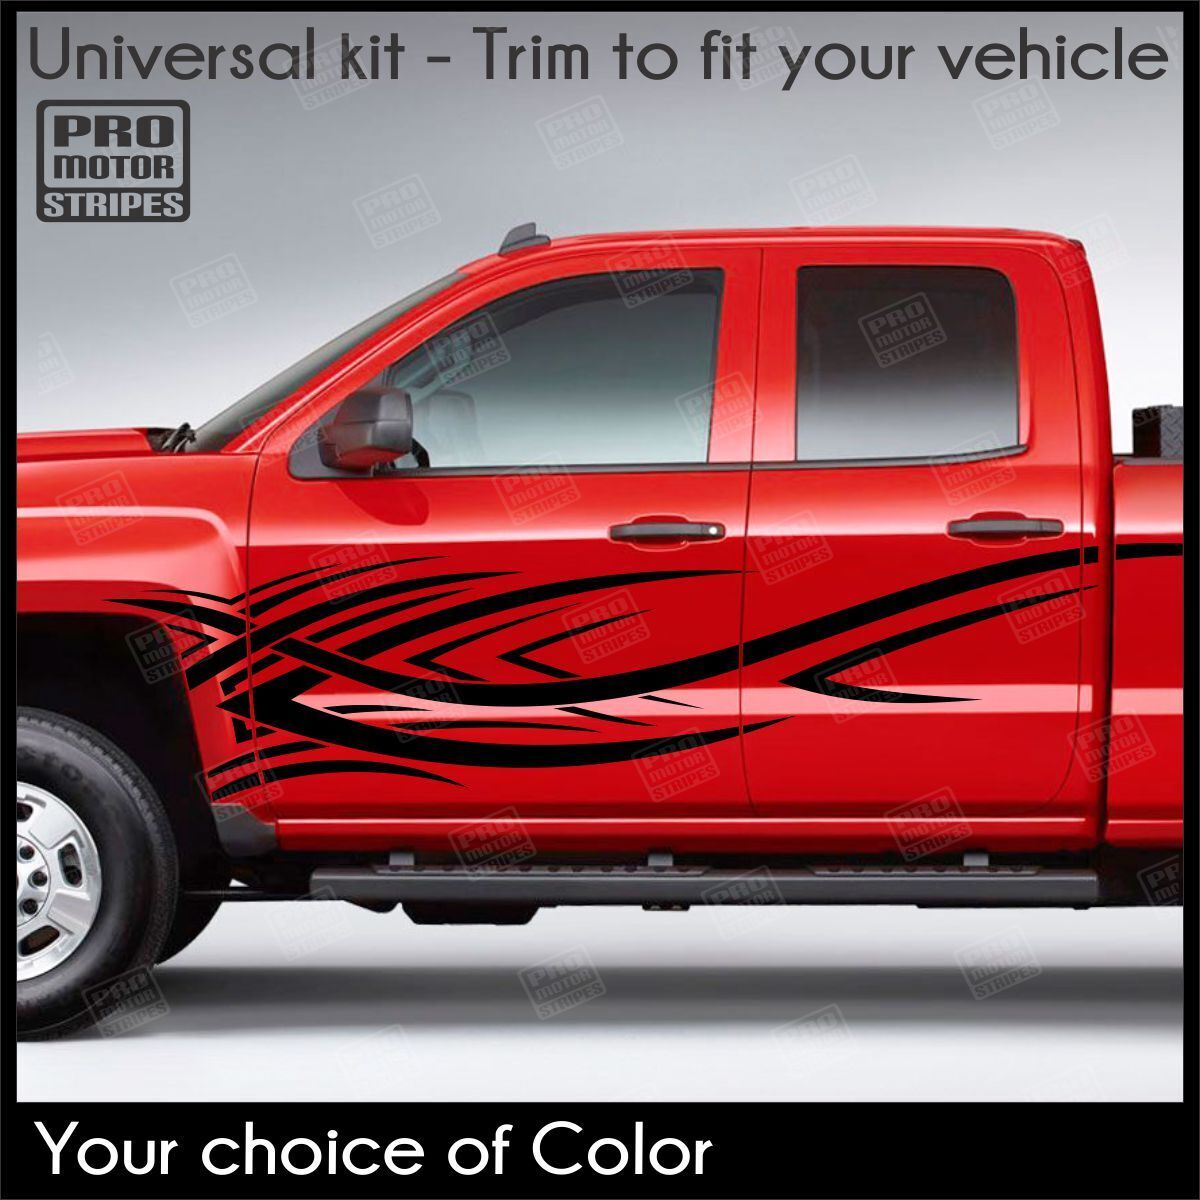 Universal Tribal Accent Side Decals For Truck or SUV Stripes (Choose Color)